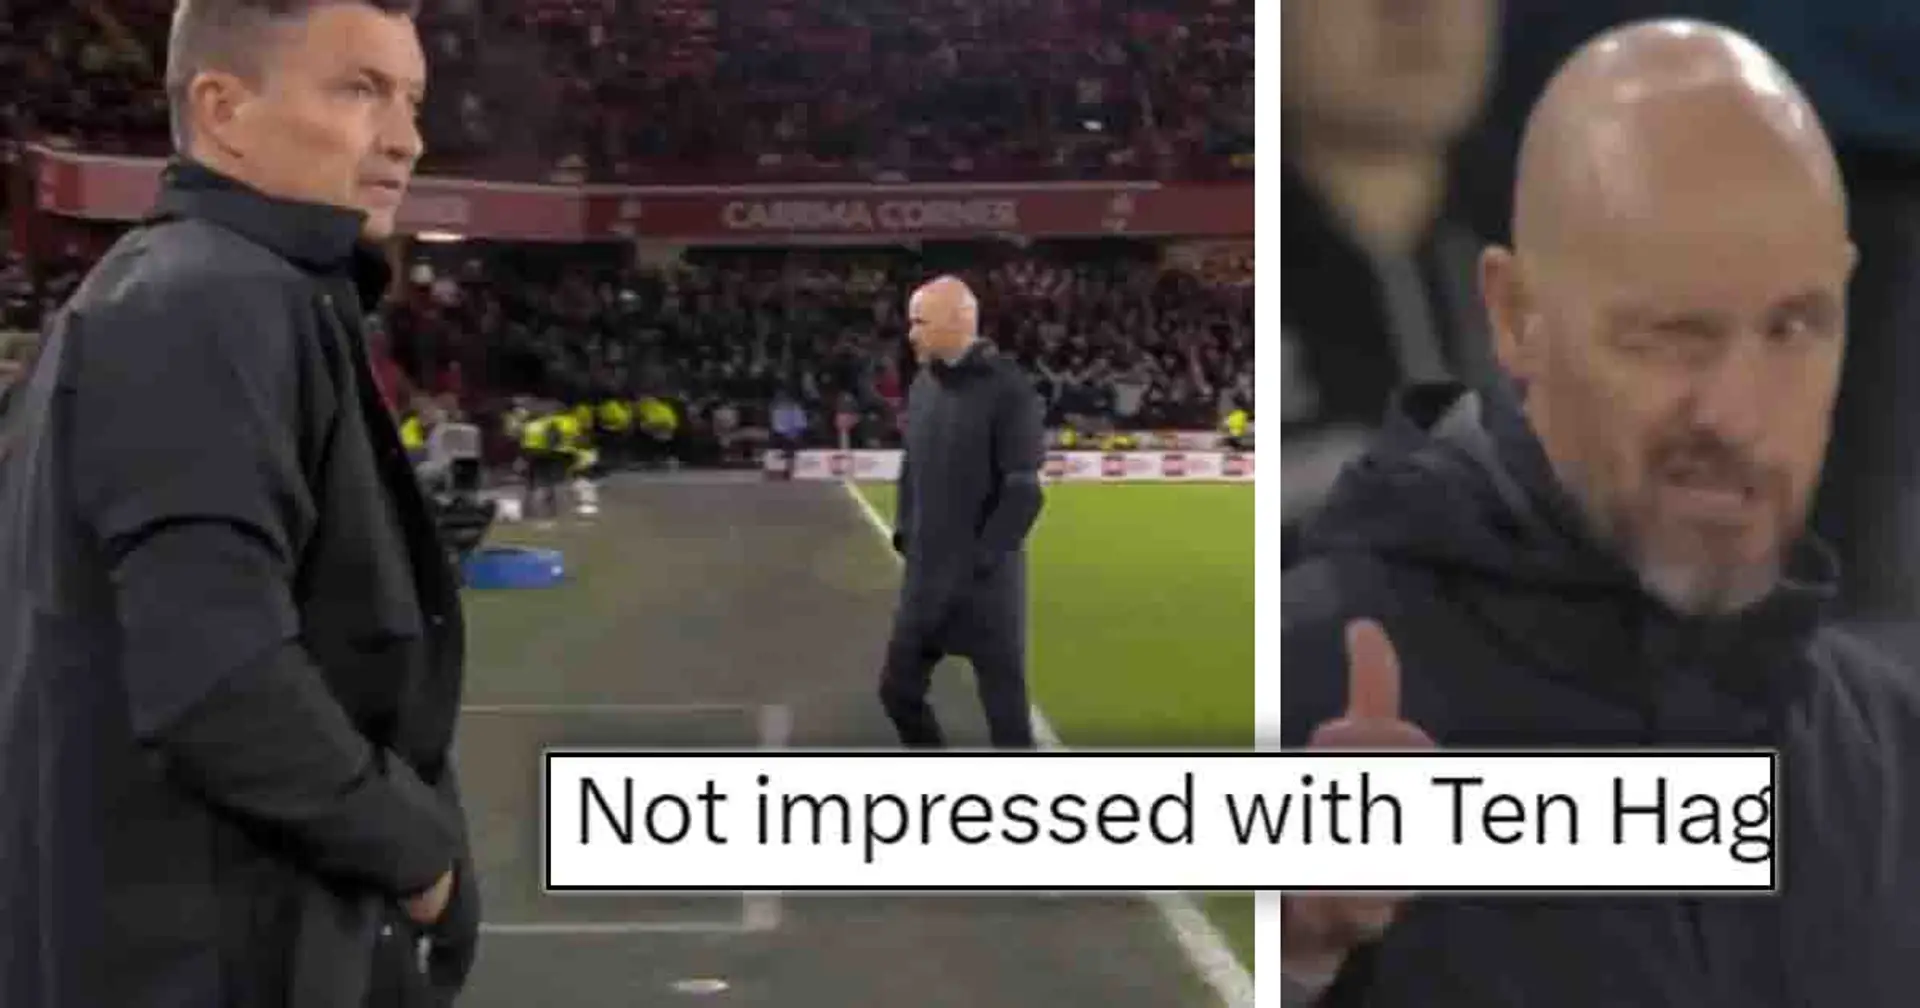 'Poor from him': Ten Hag slammed for one moment involving Sheffield United manager after final whistle